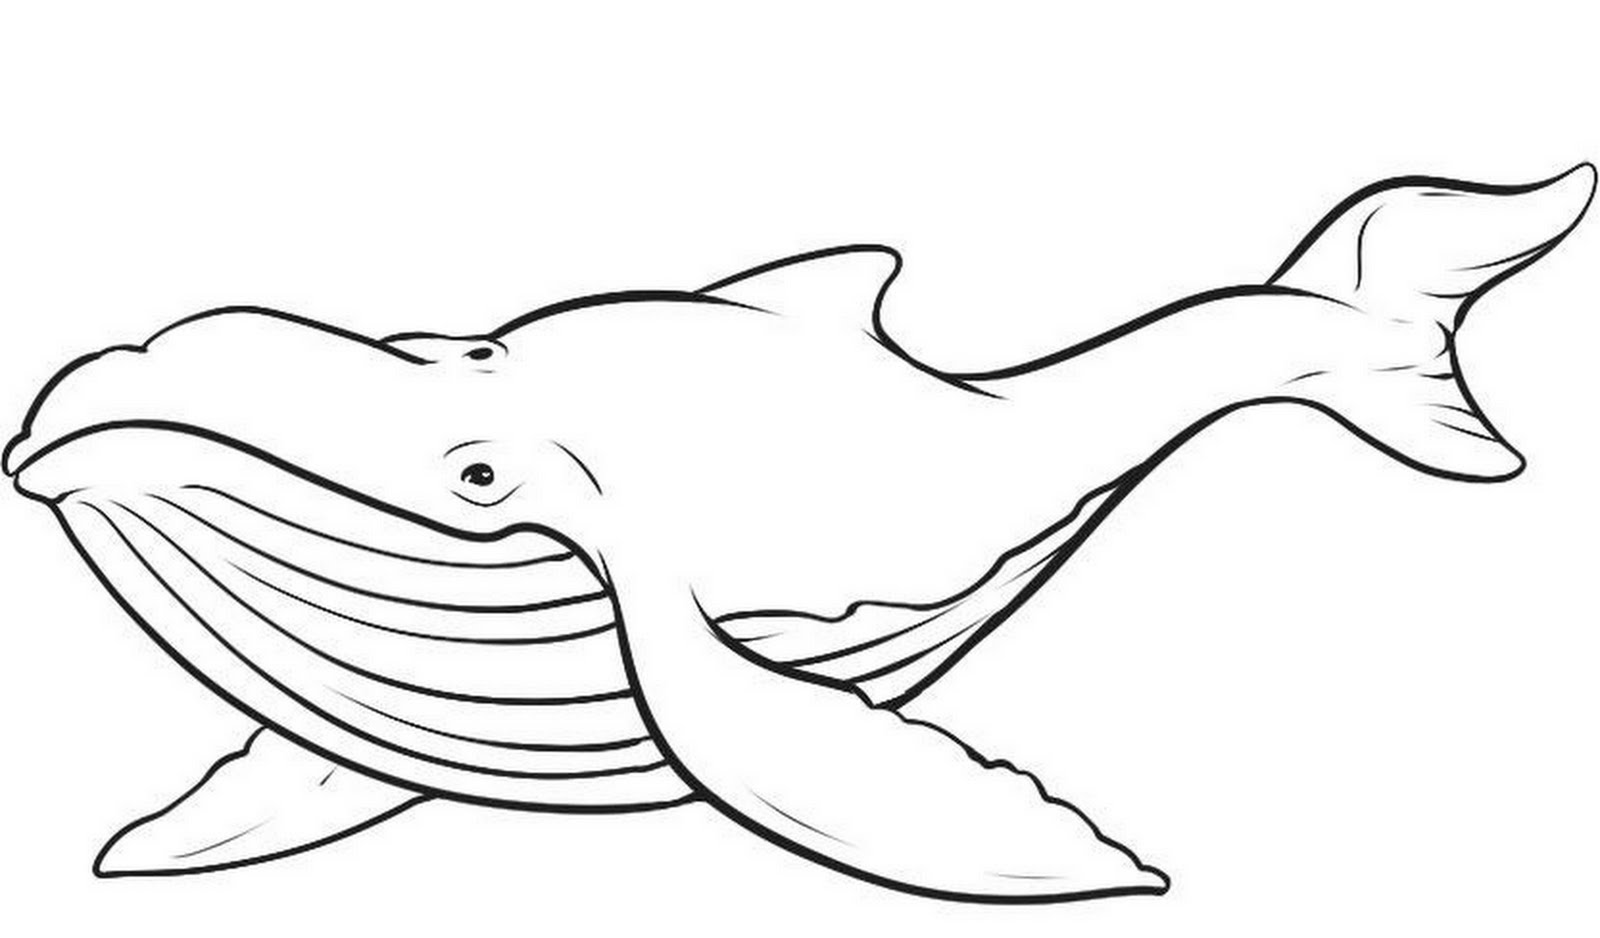 Whale Coloring Page